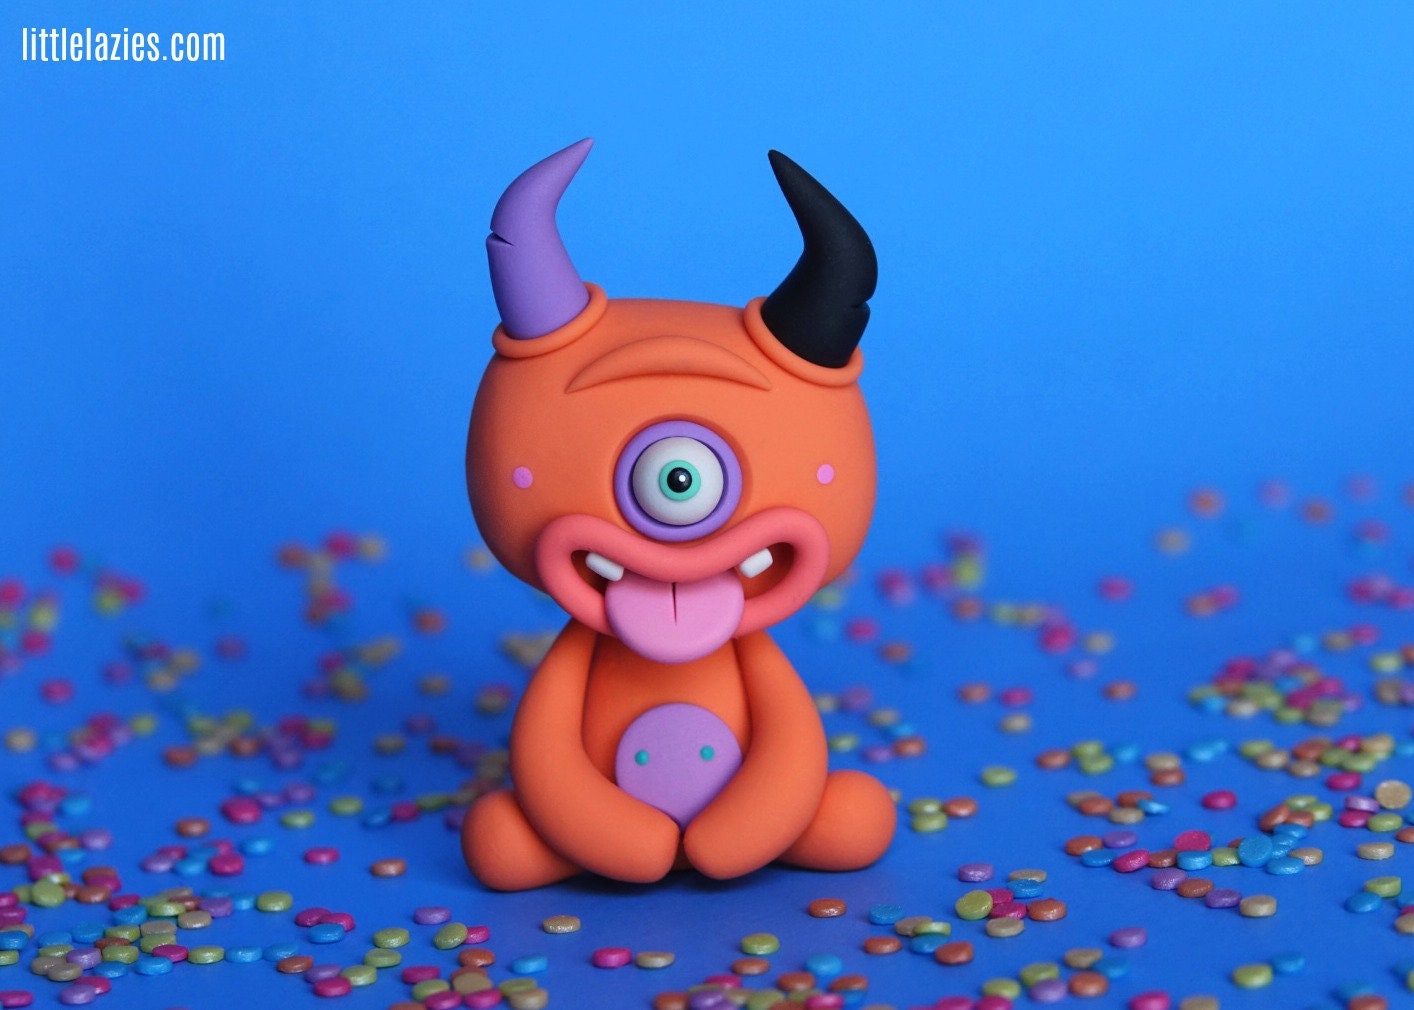 Monster Clay - Monster Clay Sculpt of the Day 08/17/19